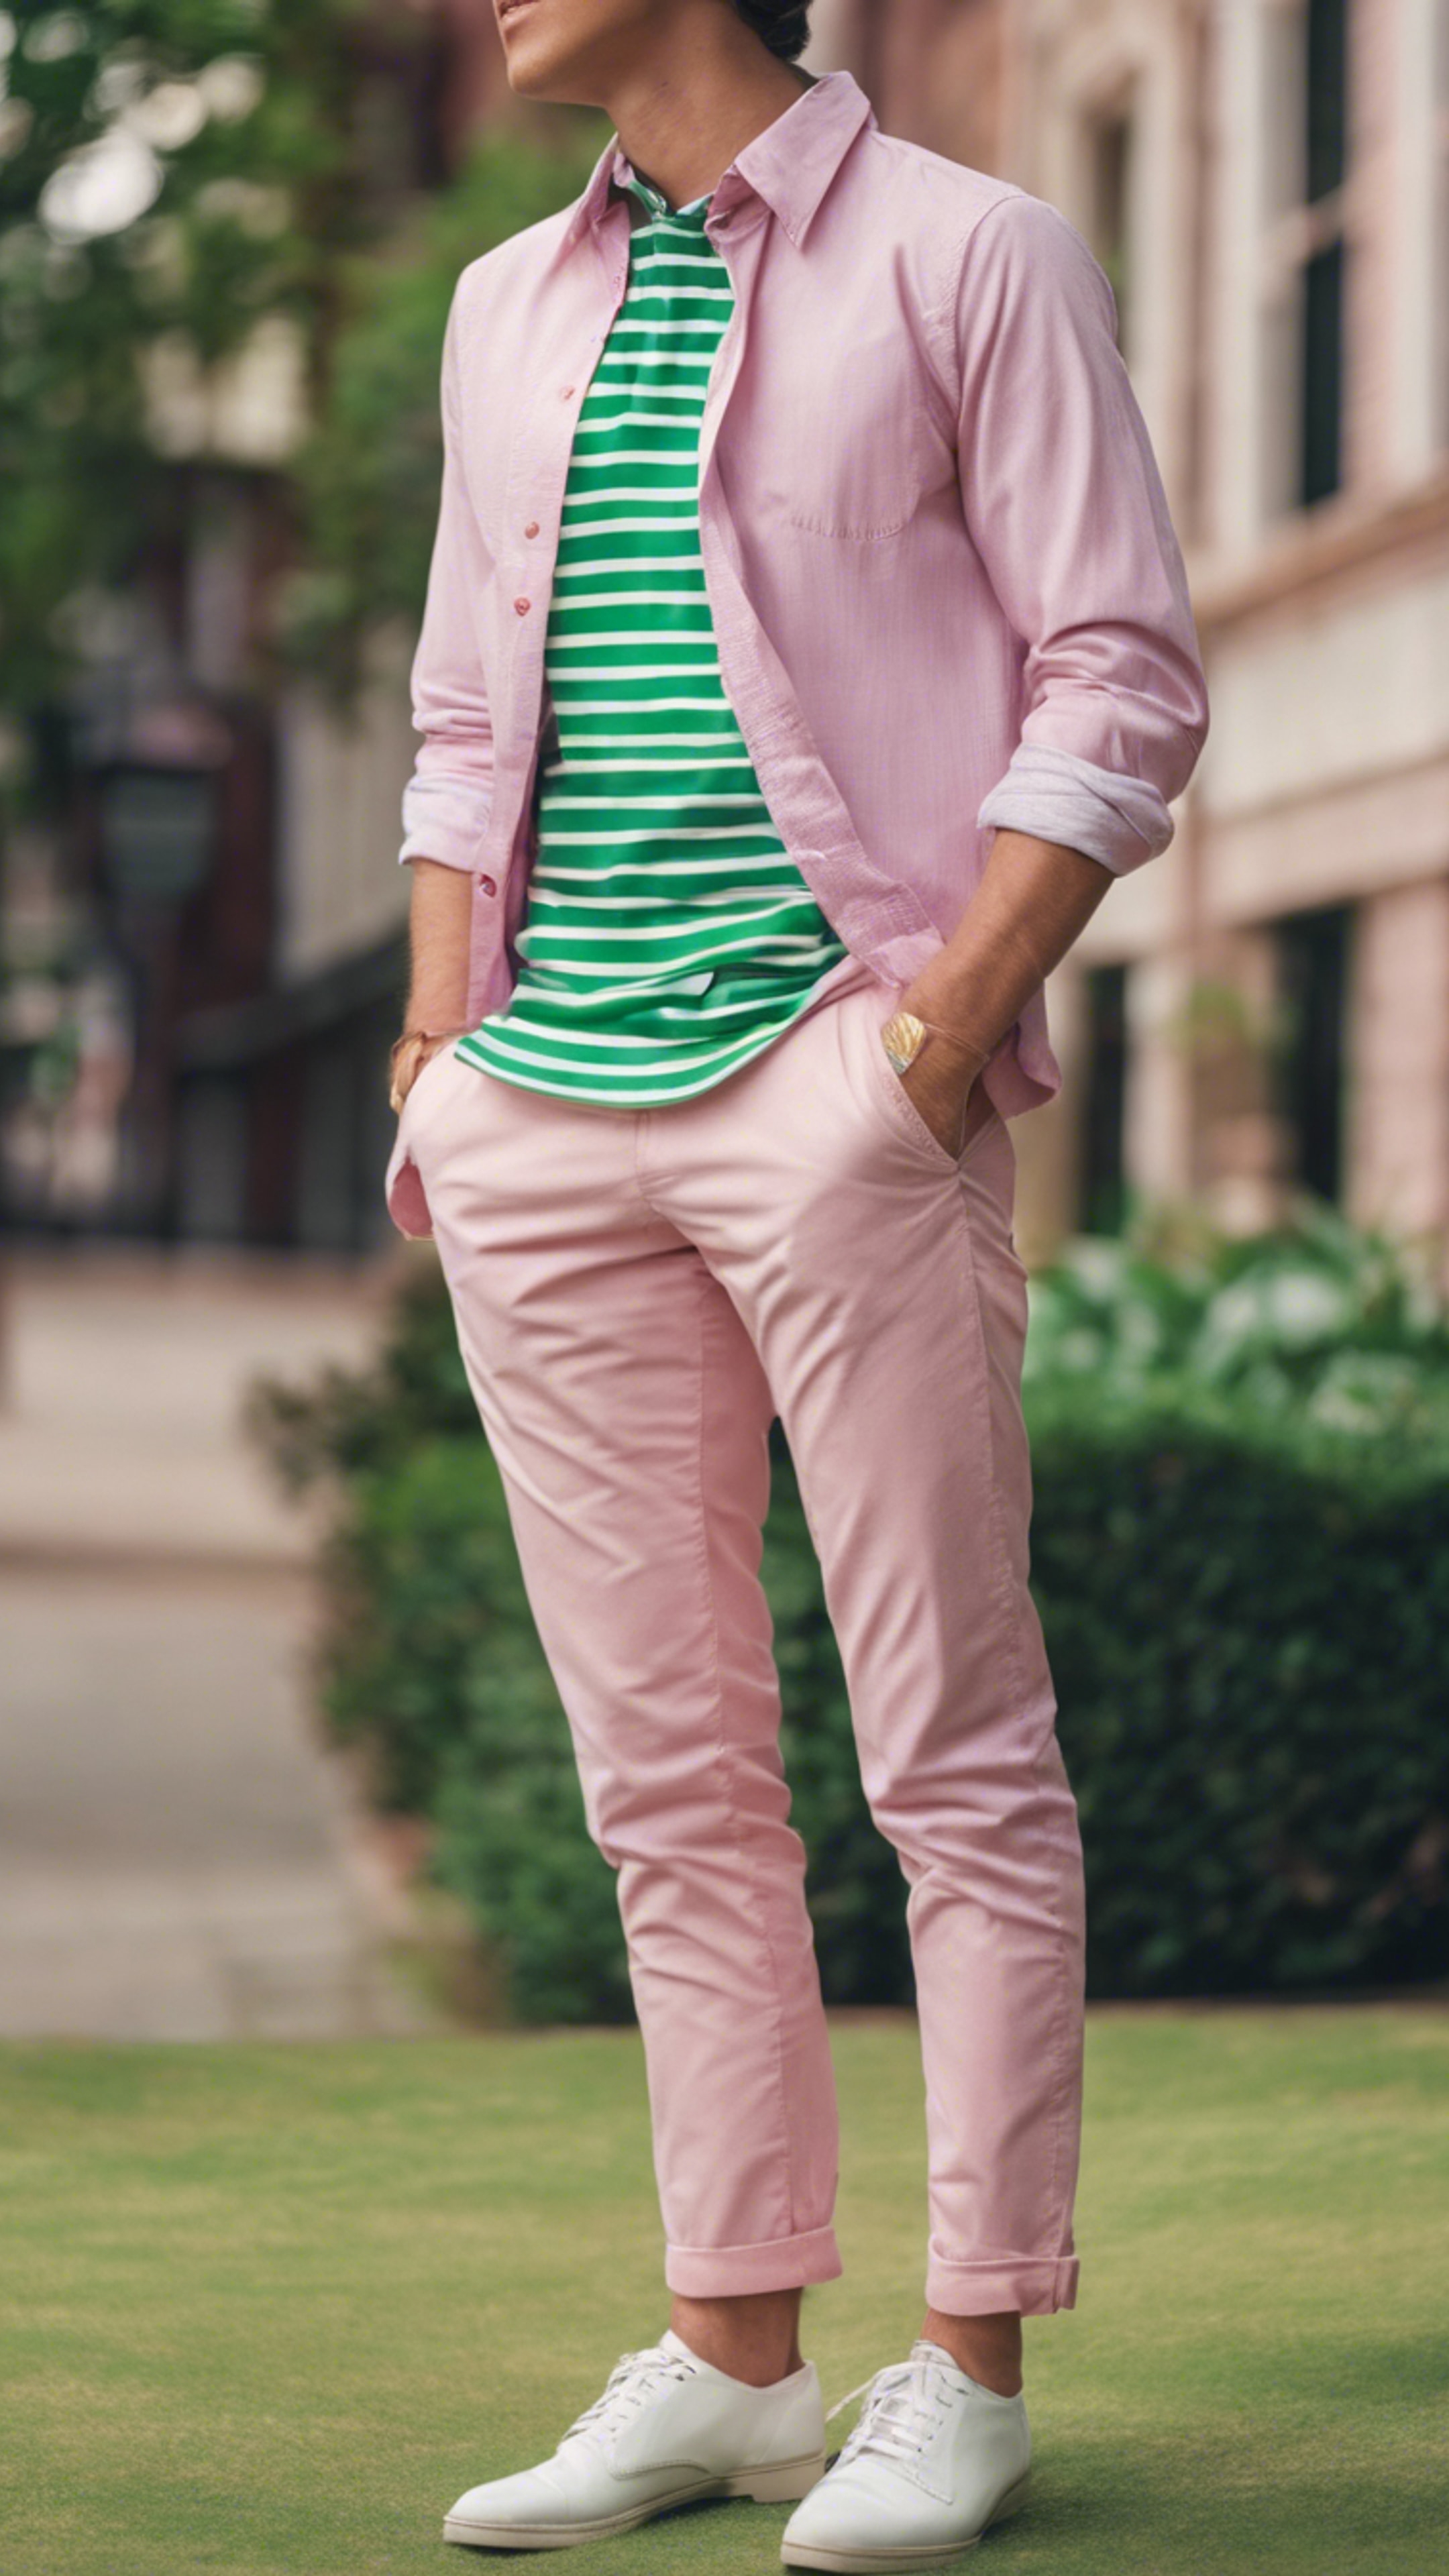 A classic preppy outfit in pink chinos with a green striped Oxford shirt. 벽지[7b2809c9502f40299443]